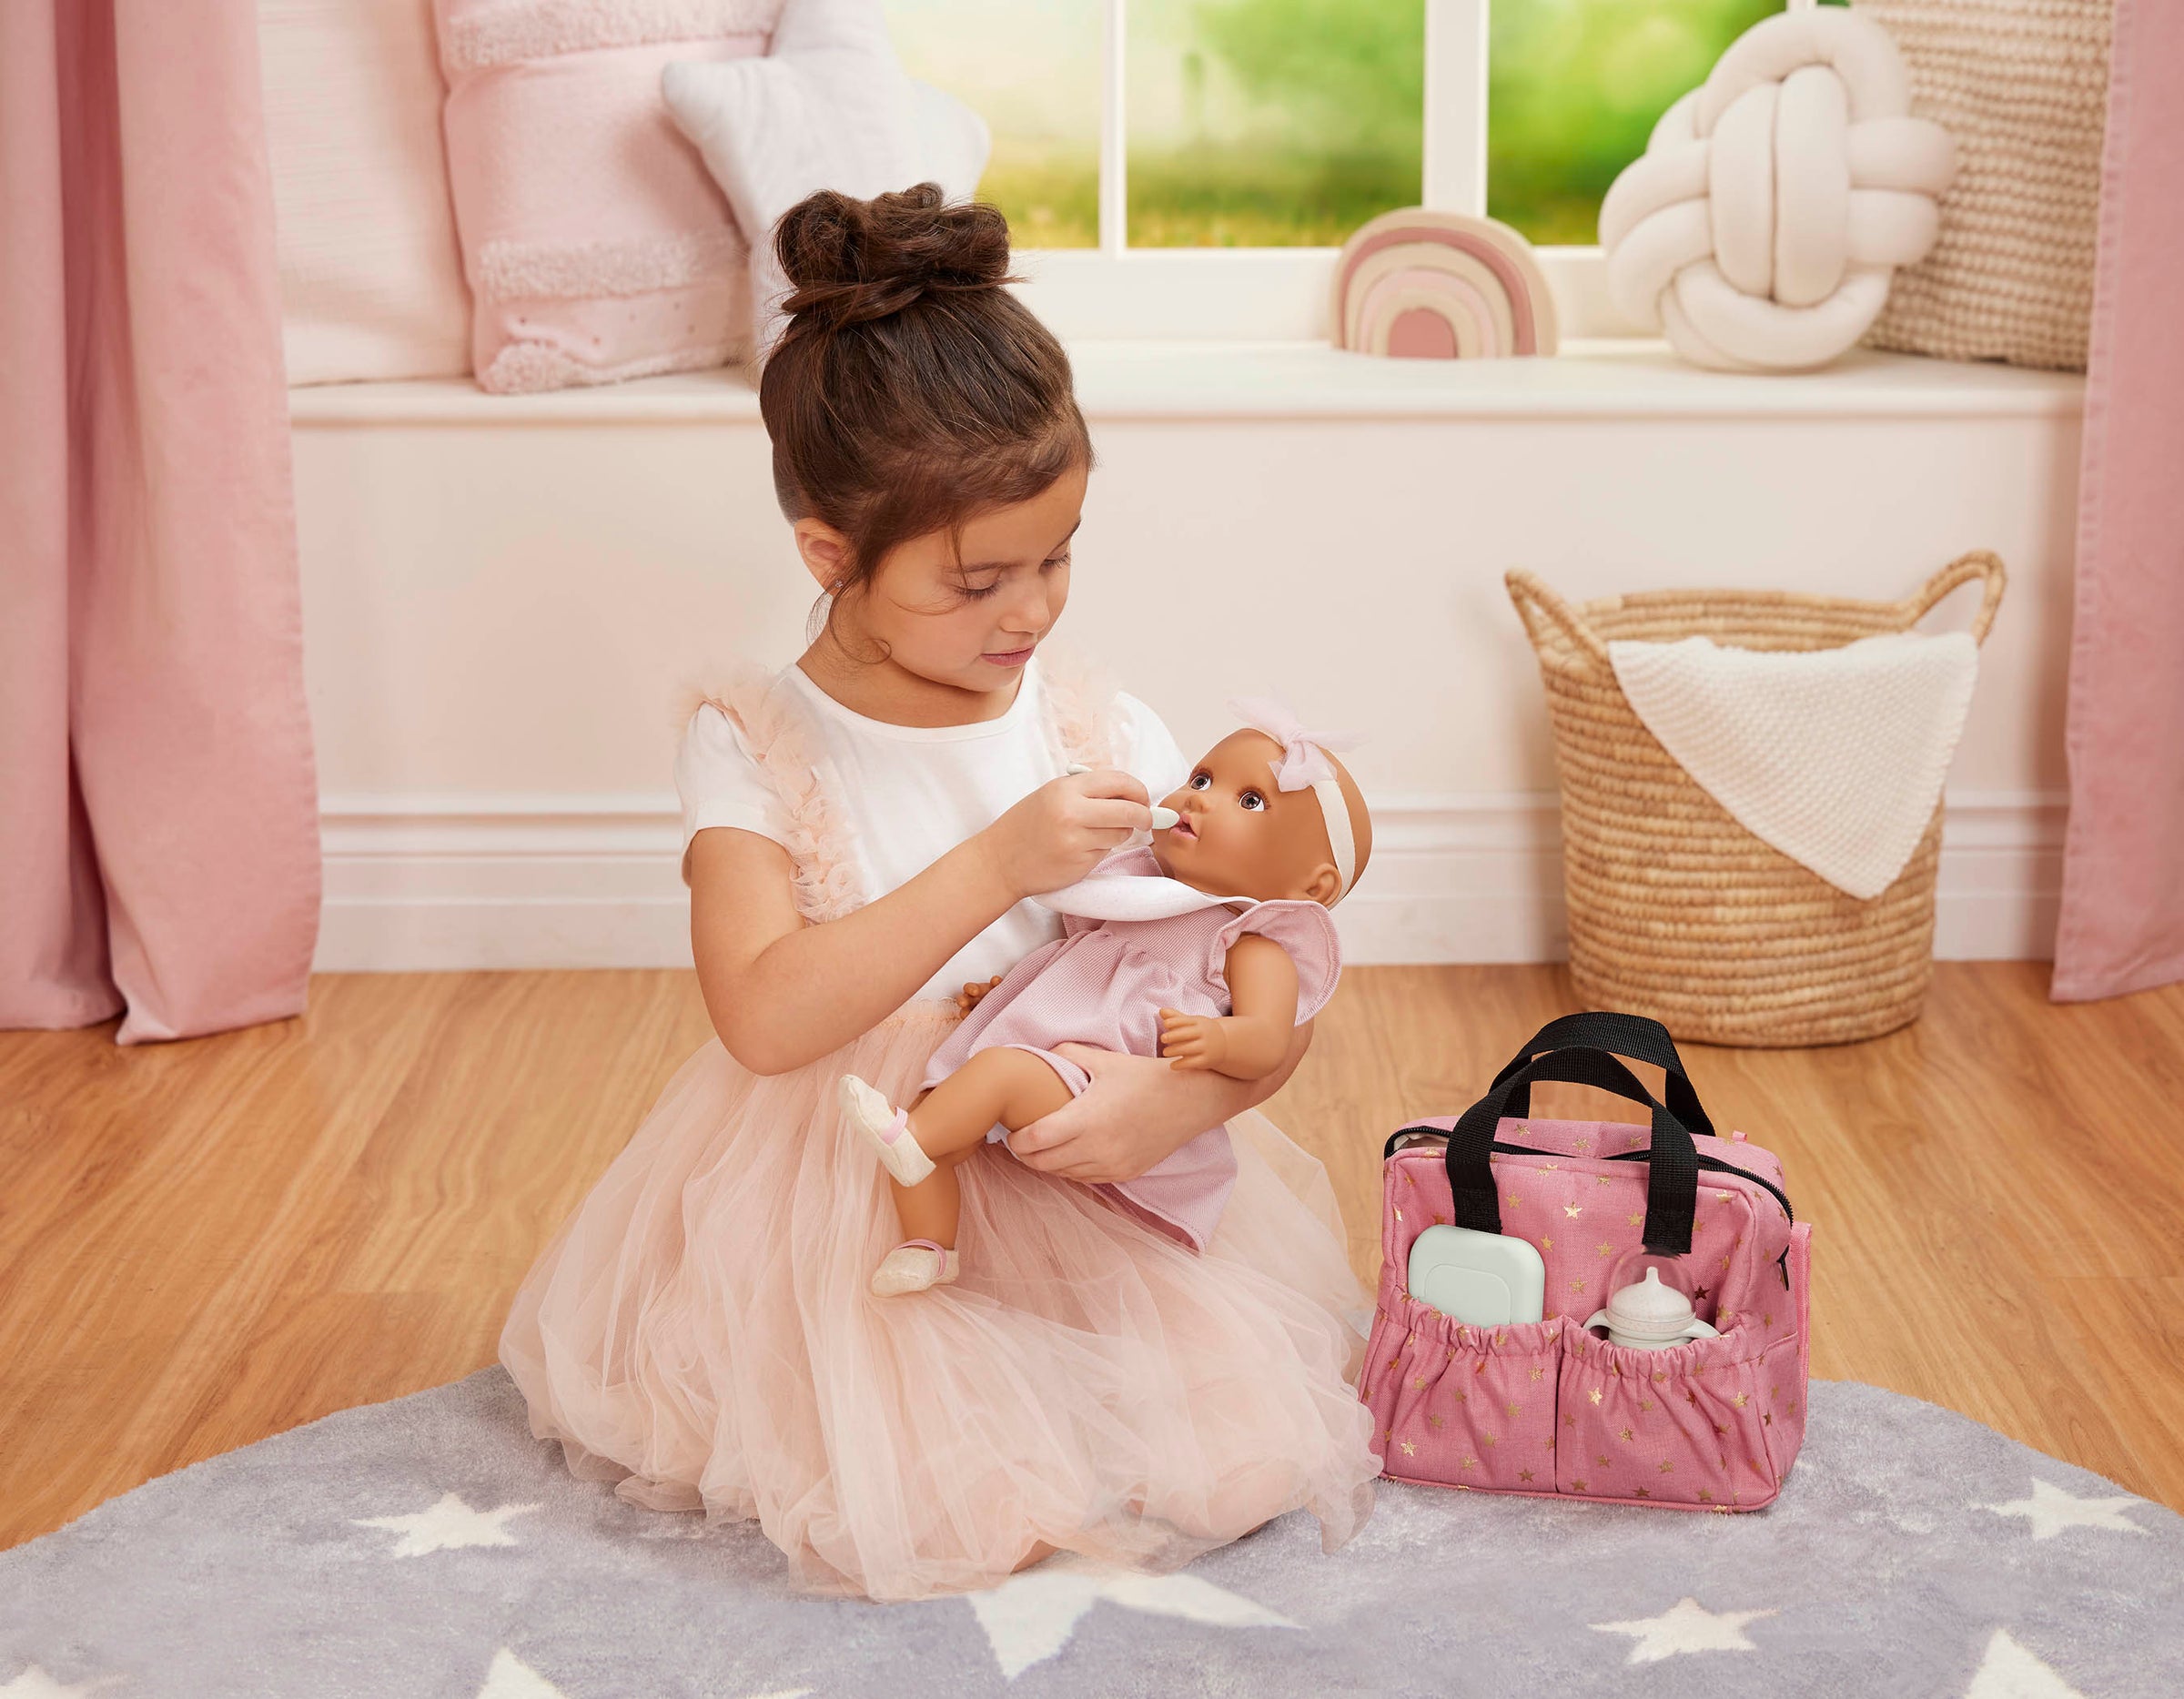 New Arrivals - New Baby Dolls & Accessories - Toys & Gifts - LullaBaby